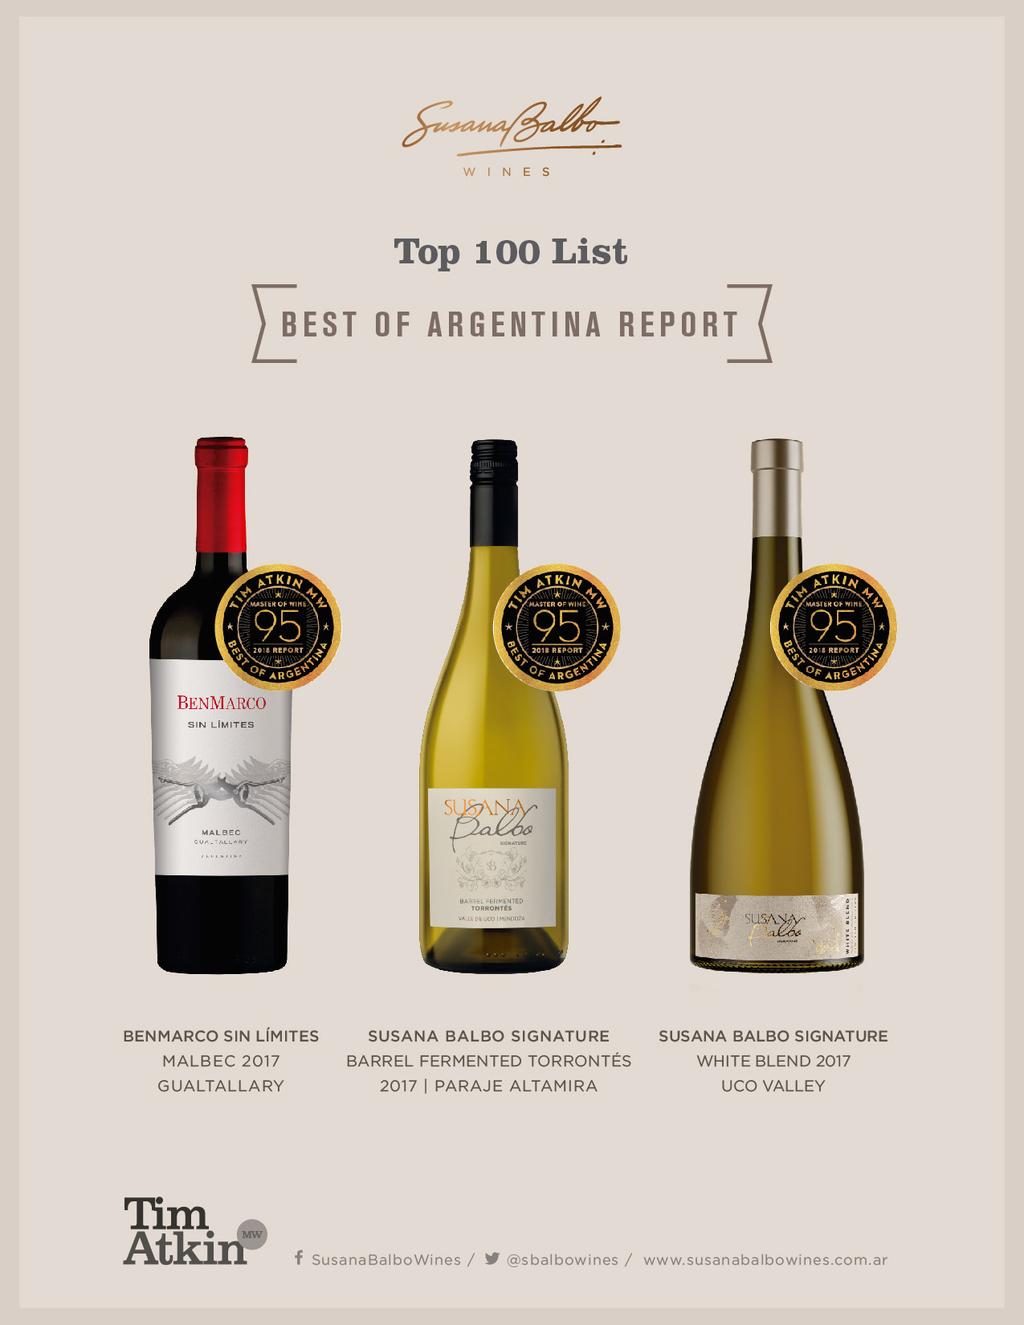 SUSANA BALBO WINES AWARDED ROSE OF THE YEAR AND 3 SPOTS ON TIM ATKIN S TOP 100 LIST May, 2018 Susana Balbo Wines earned top honors in the latest annual report by international wine critic Tim Atkin,